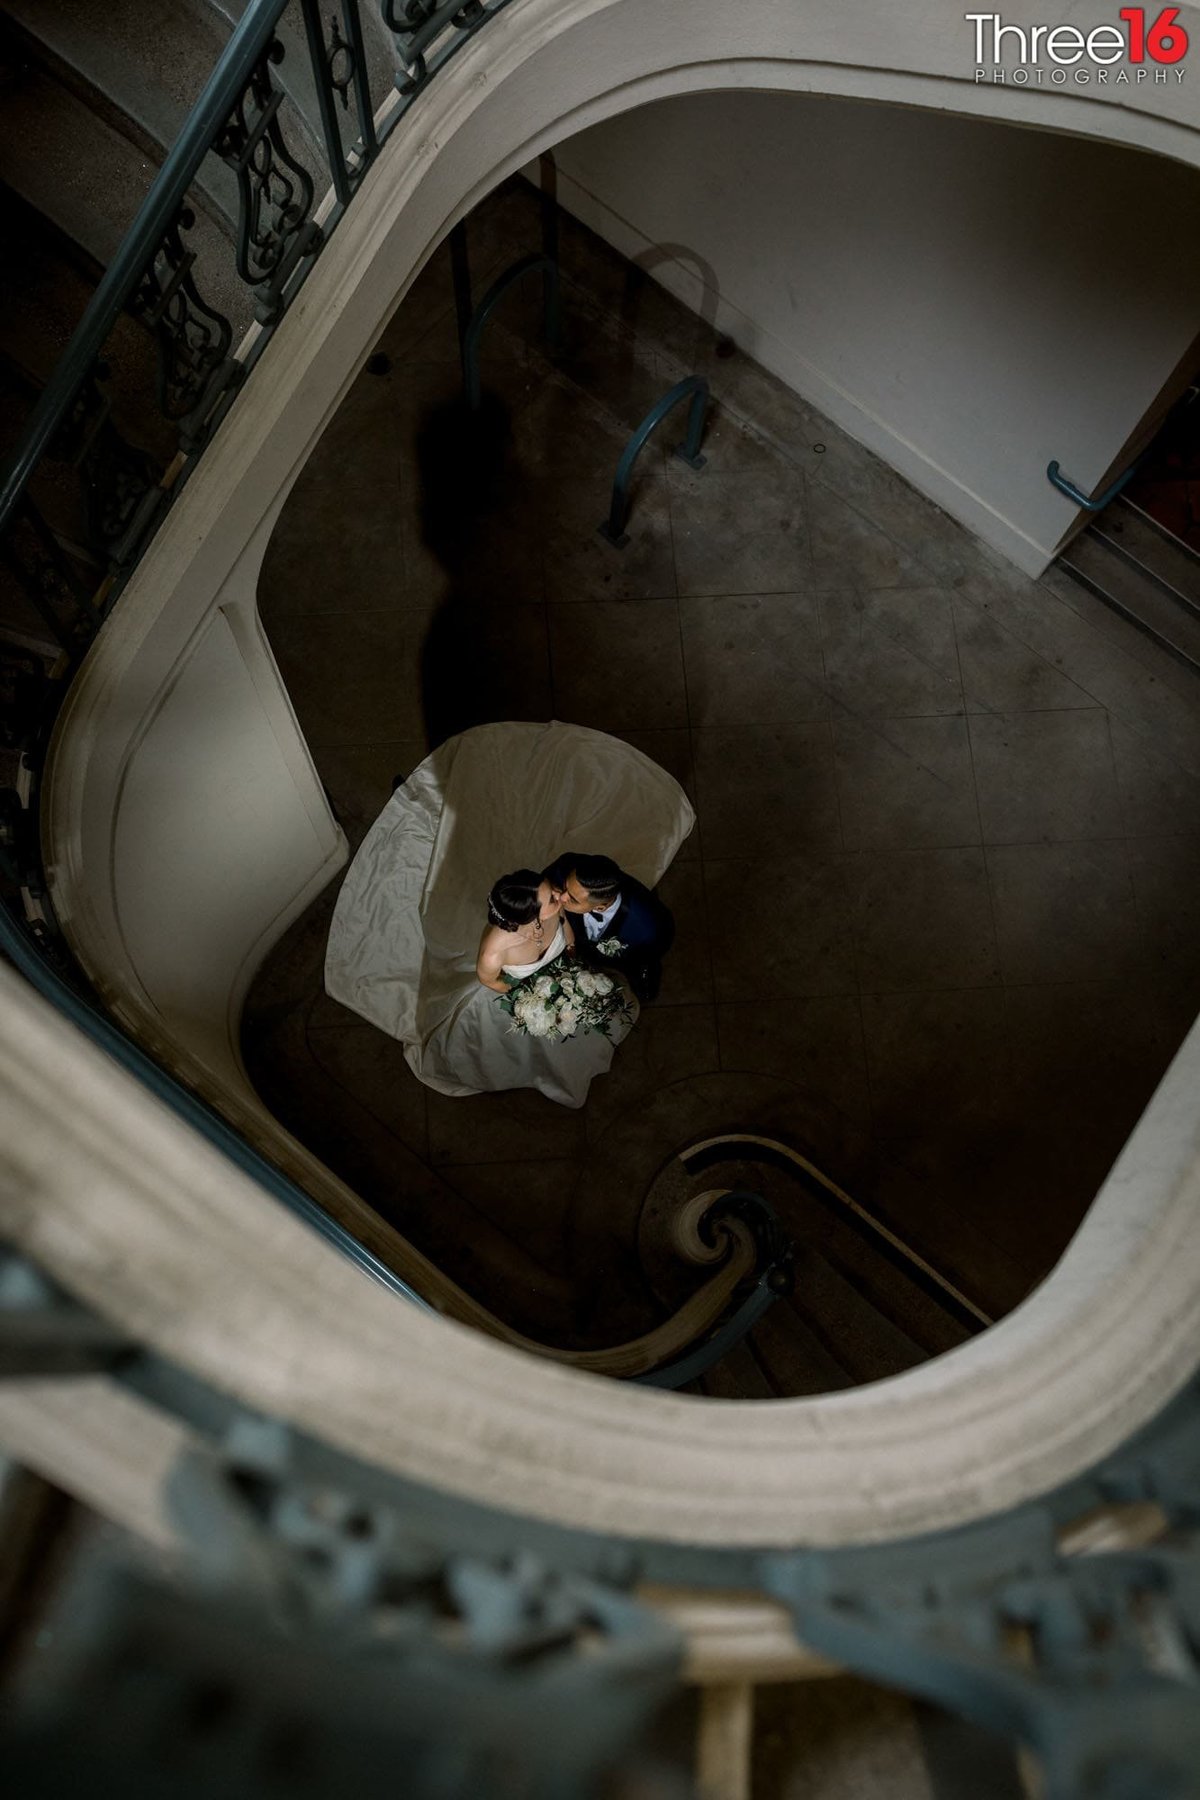 Bride and Groom share an intimate moment at the bottom of the spiral stairwell